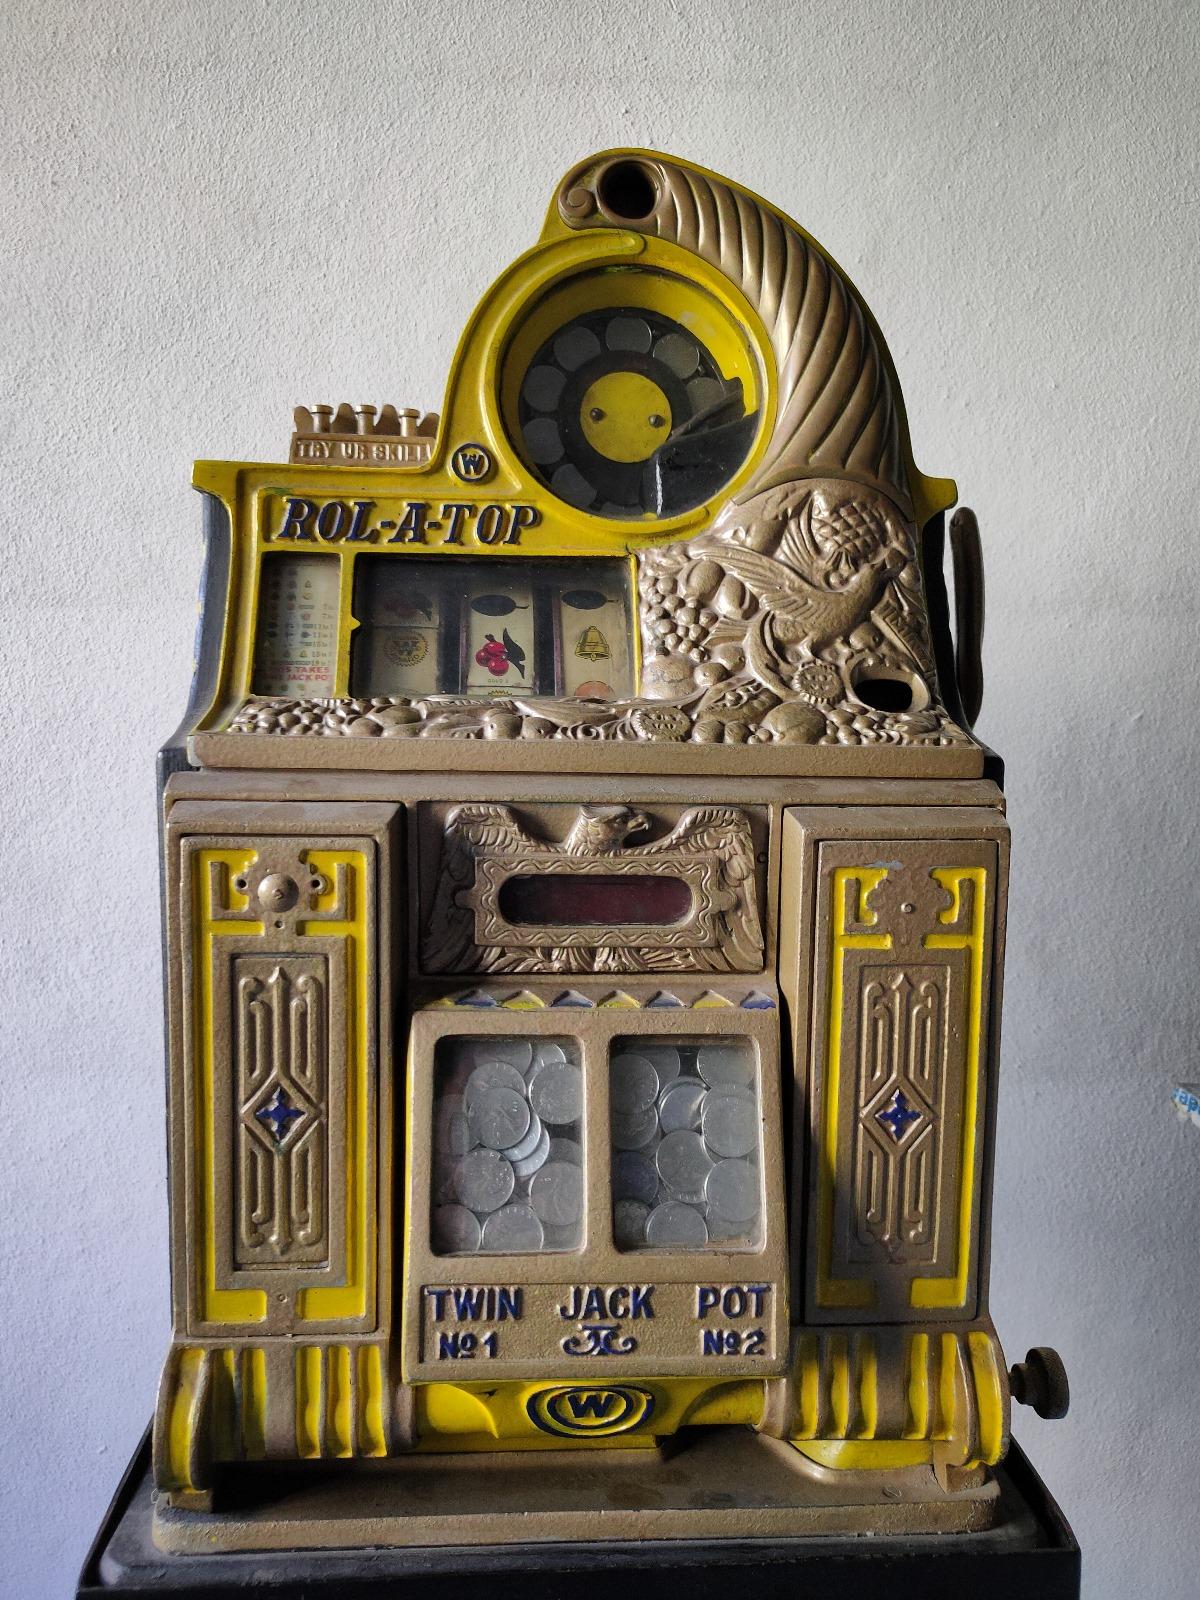 Watling Rol A Top 25 cent slot machine circa 1930's. The machine has the following unique features: - Skill stops - Golden AWard token feature - mint vendors - Bird of Paradise desirable machine - quarter machine rare missing key on back.
unverified